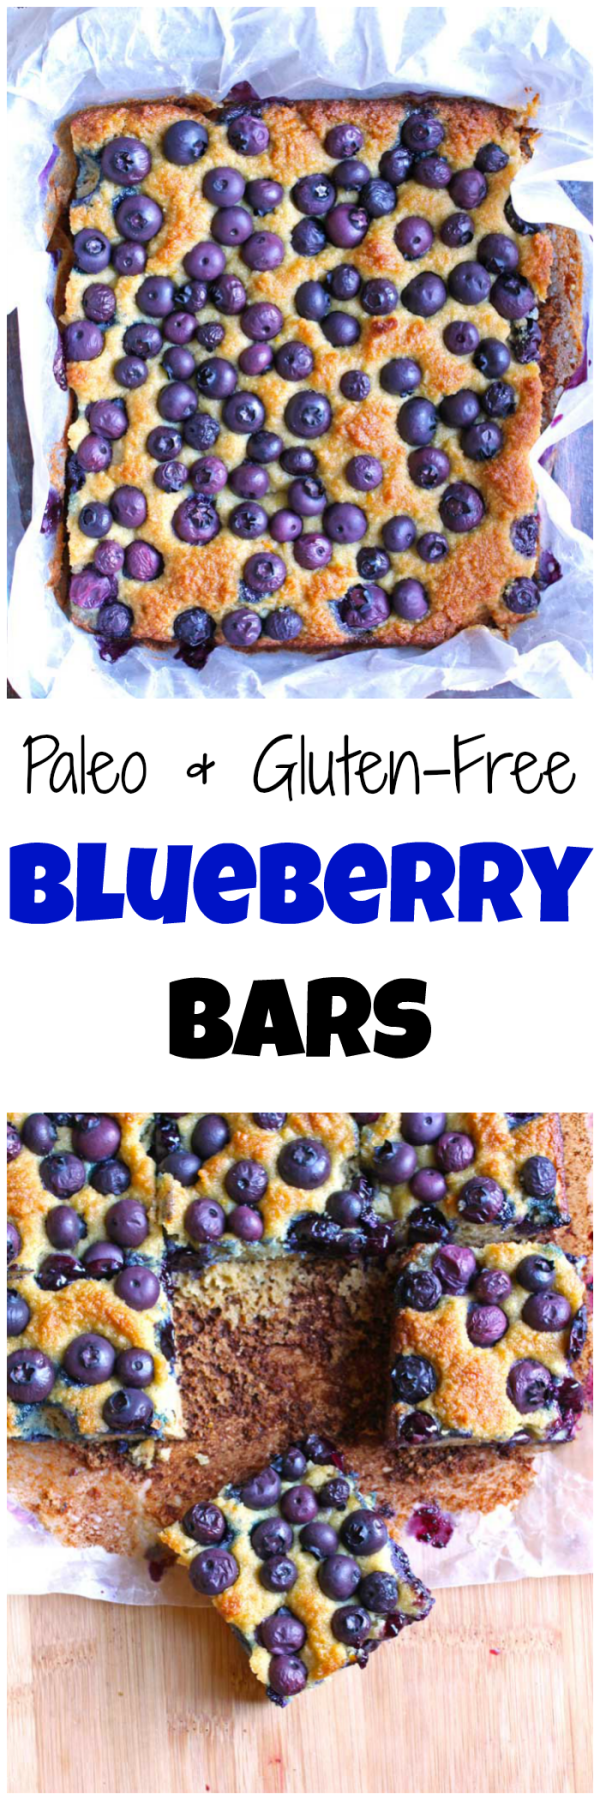 Paleo Blueberry Bars | Need a quick grab-and-go breakfast? Or a simple mid-morning snack? These breakfast bars are made with all